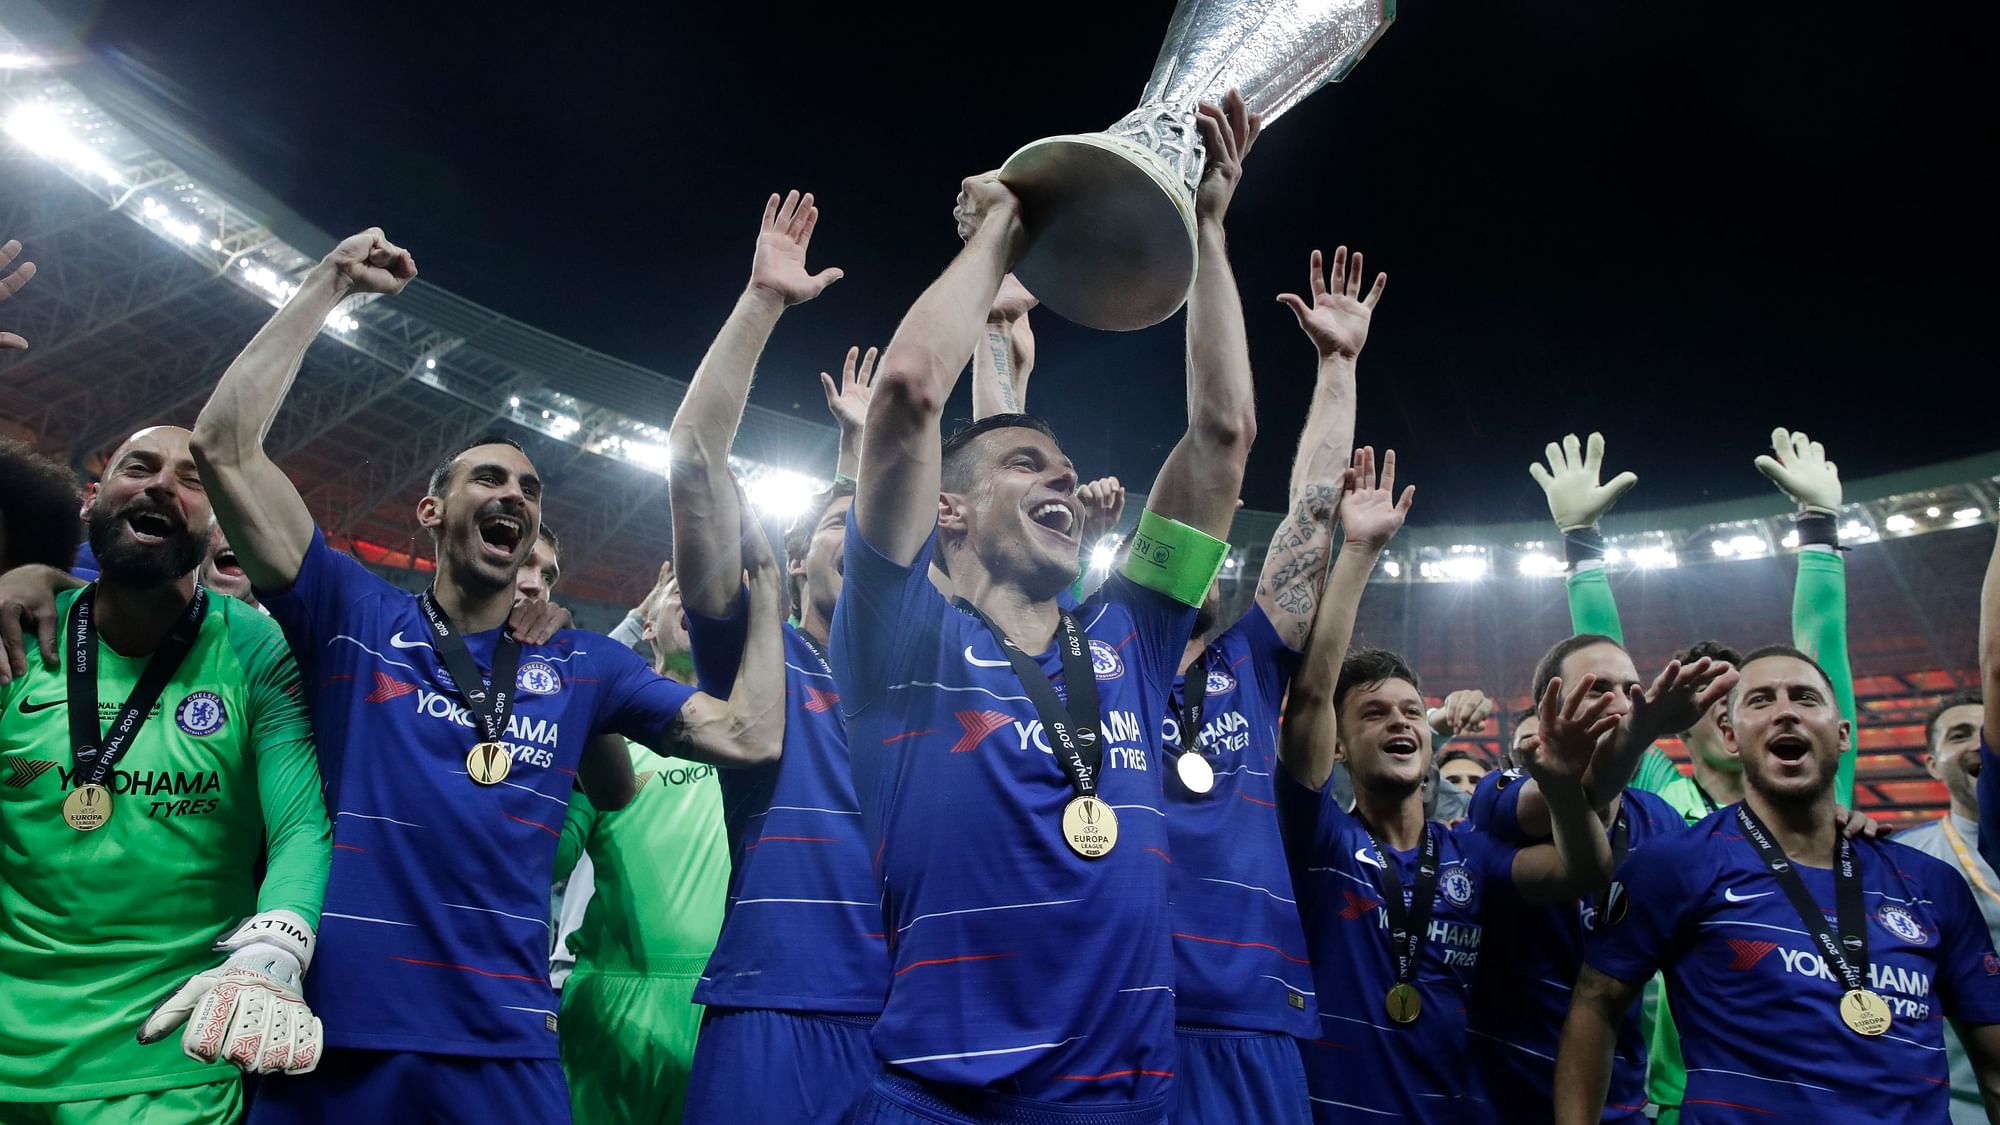 Chelsea’s victory also ensured that Maurizio Sarri got the first trophy of his managerial career.